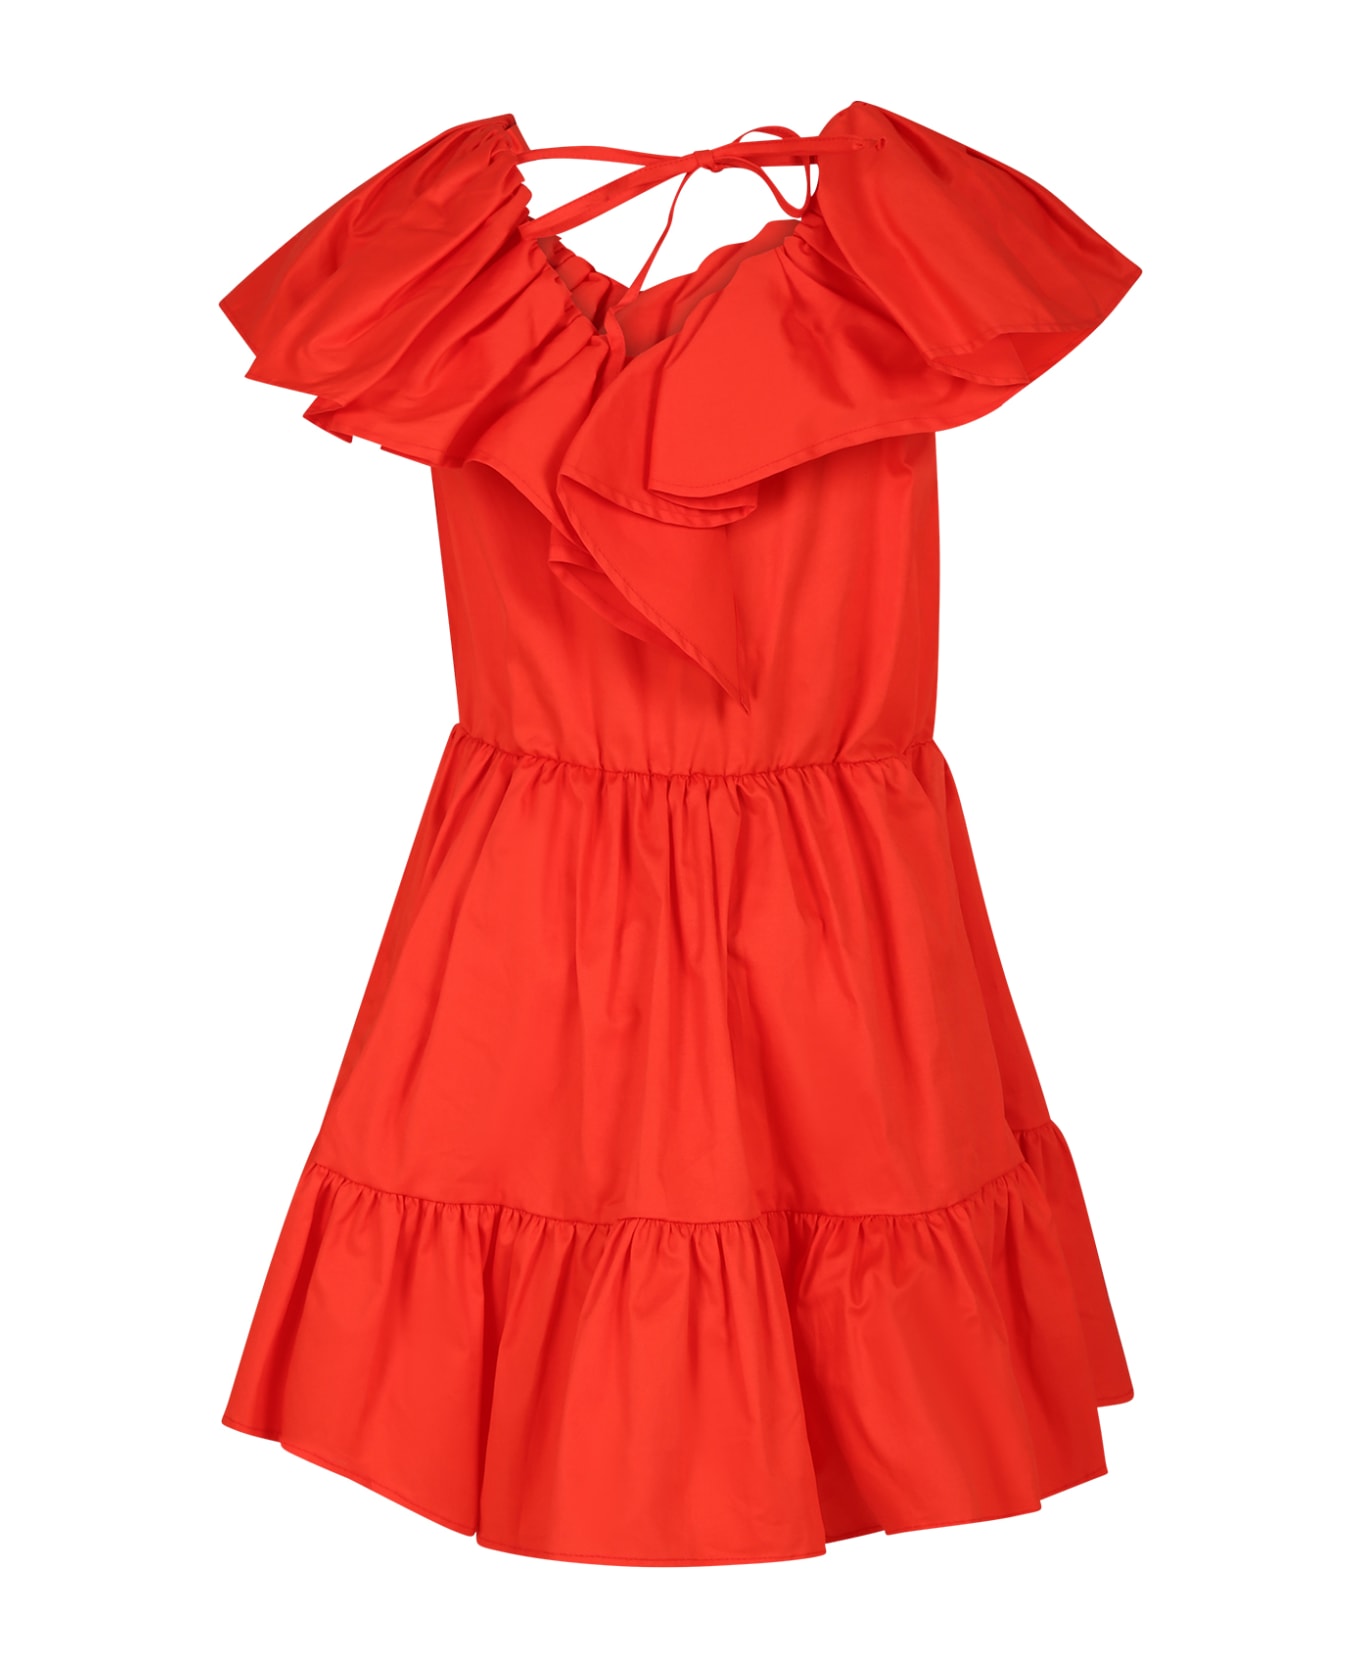 MSGM Red Dress For Girl With Logo - Red